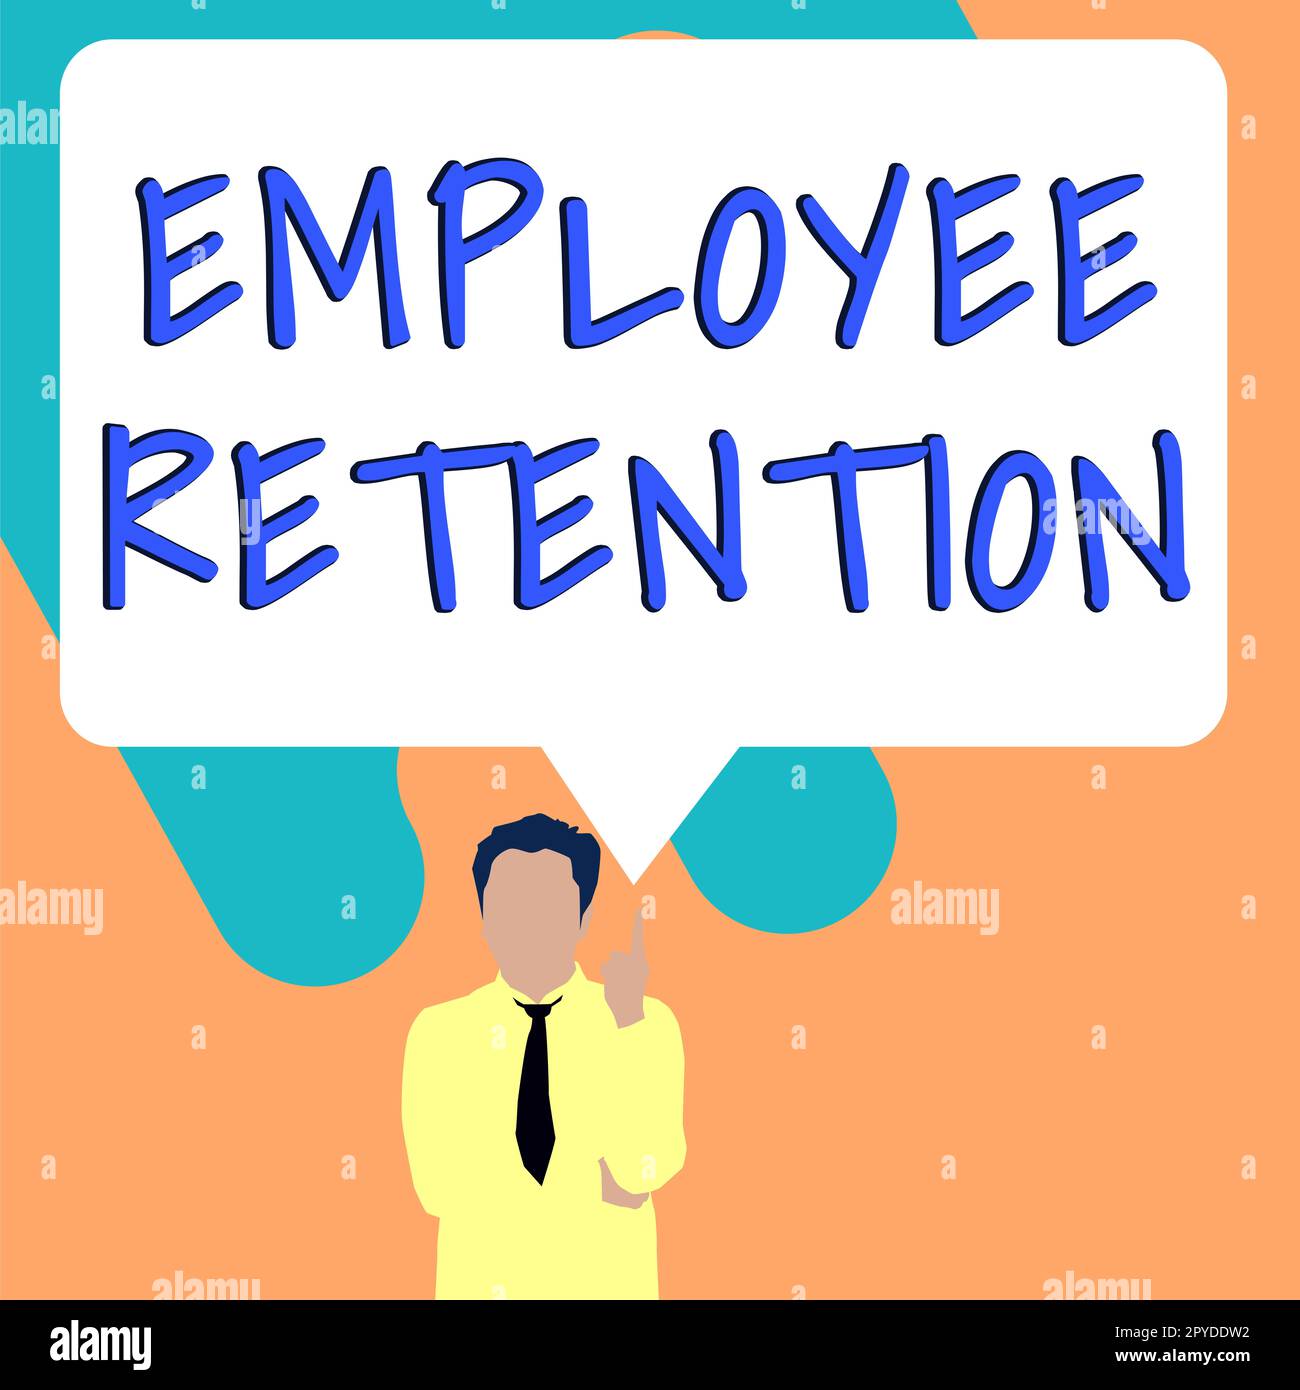 Text showing inspiration Employee Retention. Word for internal recruitment method employed by organizations Stock Photo